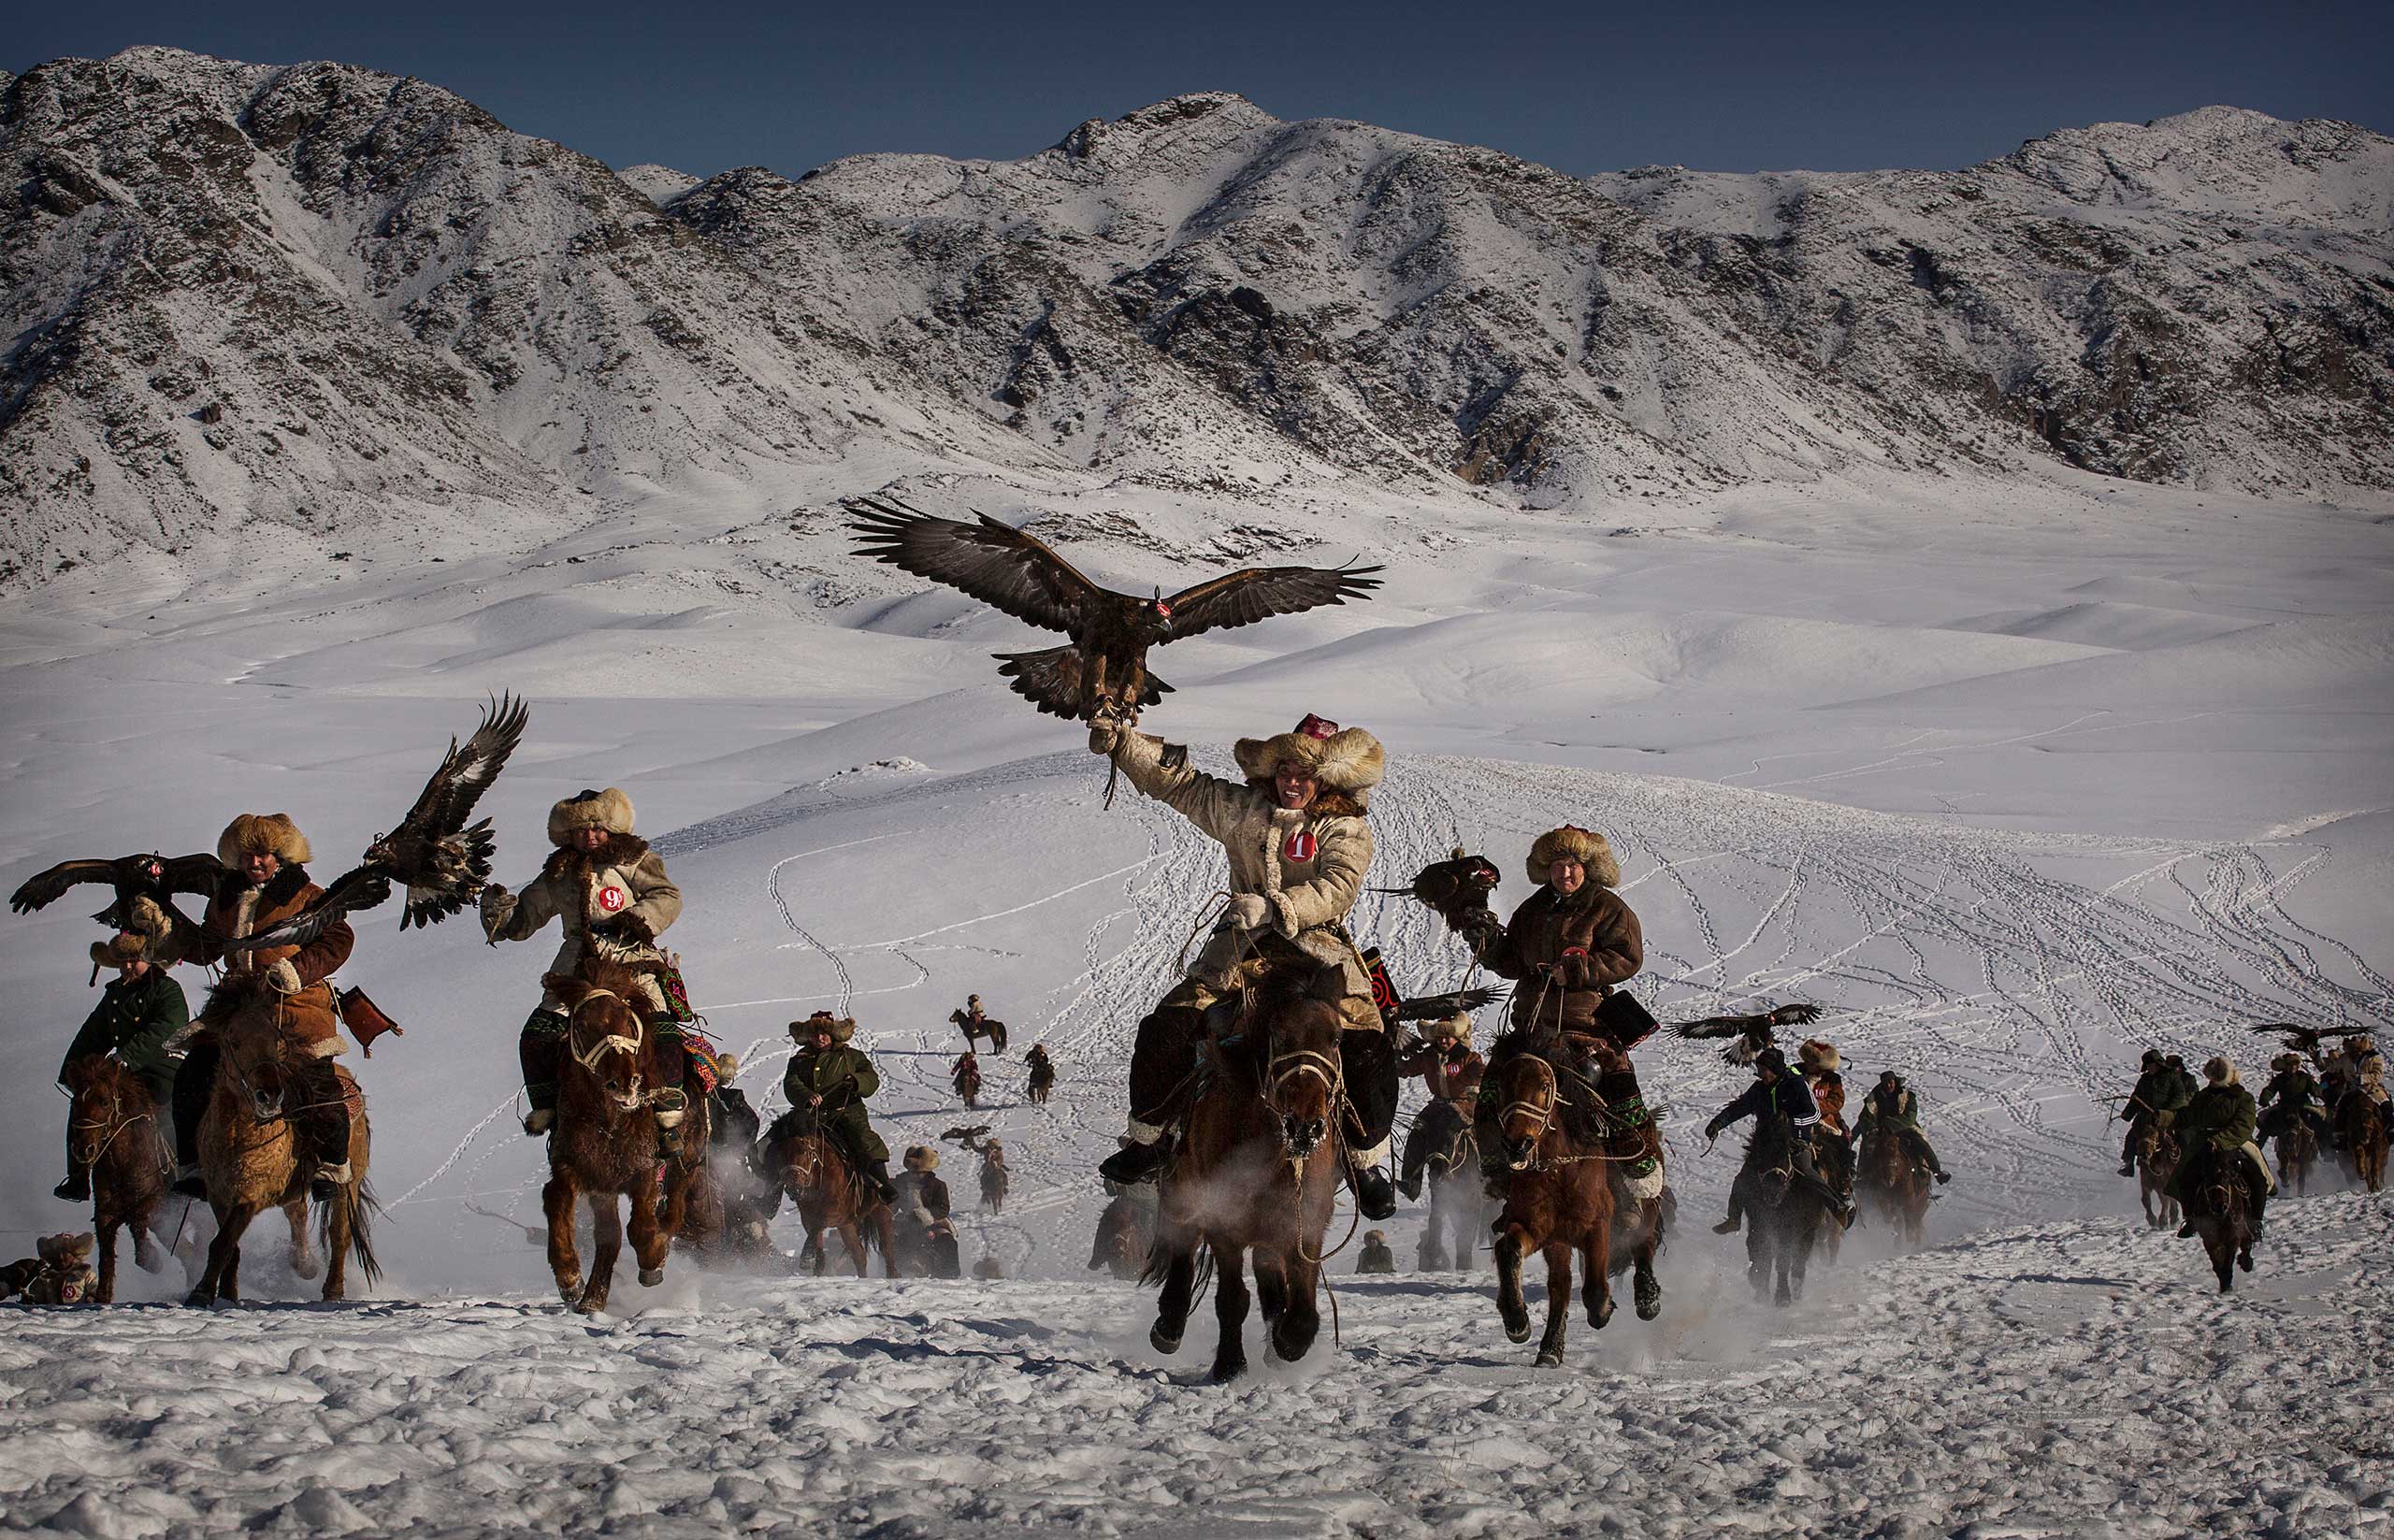 Chinese Kazakh eagle hunters ride with their eagles during a local competition in the mountains of Qinghe County, Xinjiang, northwestern China, Jan. 30, 2015.